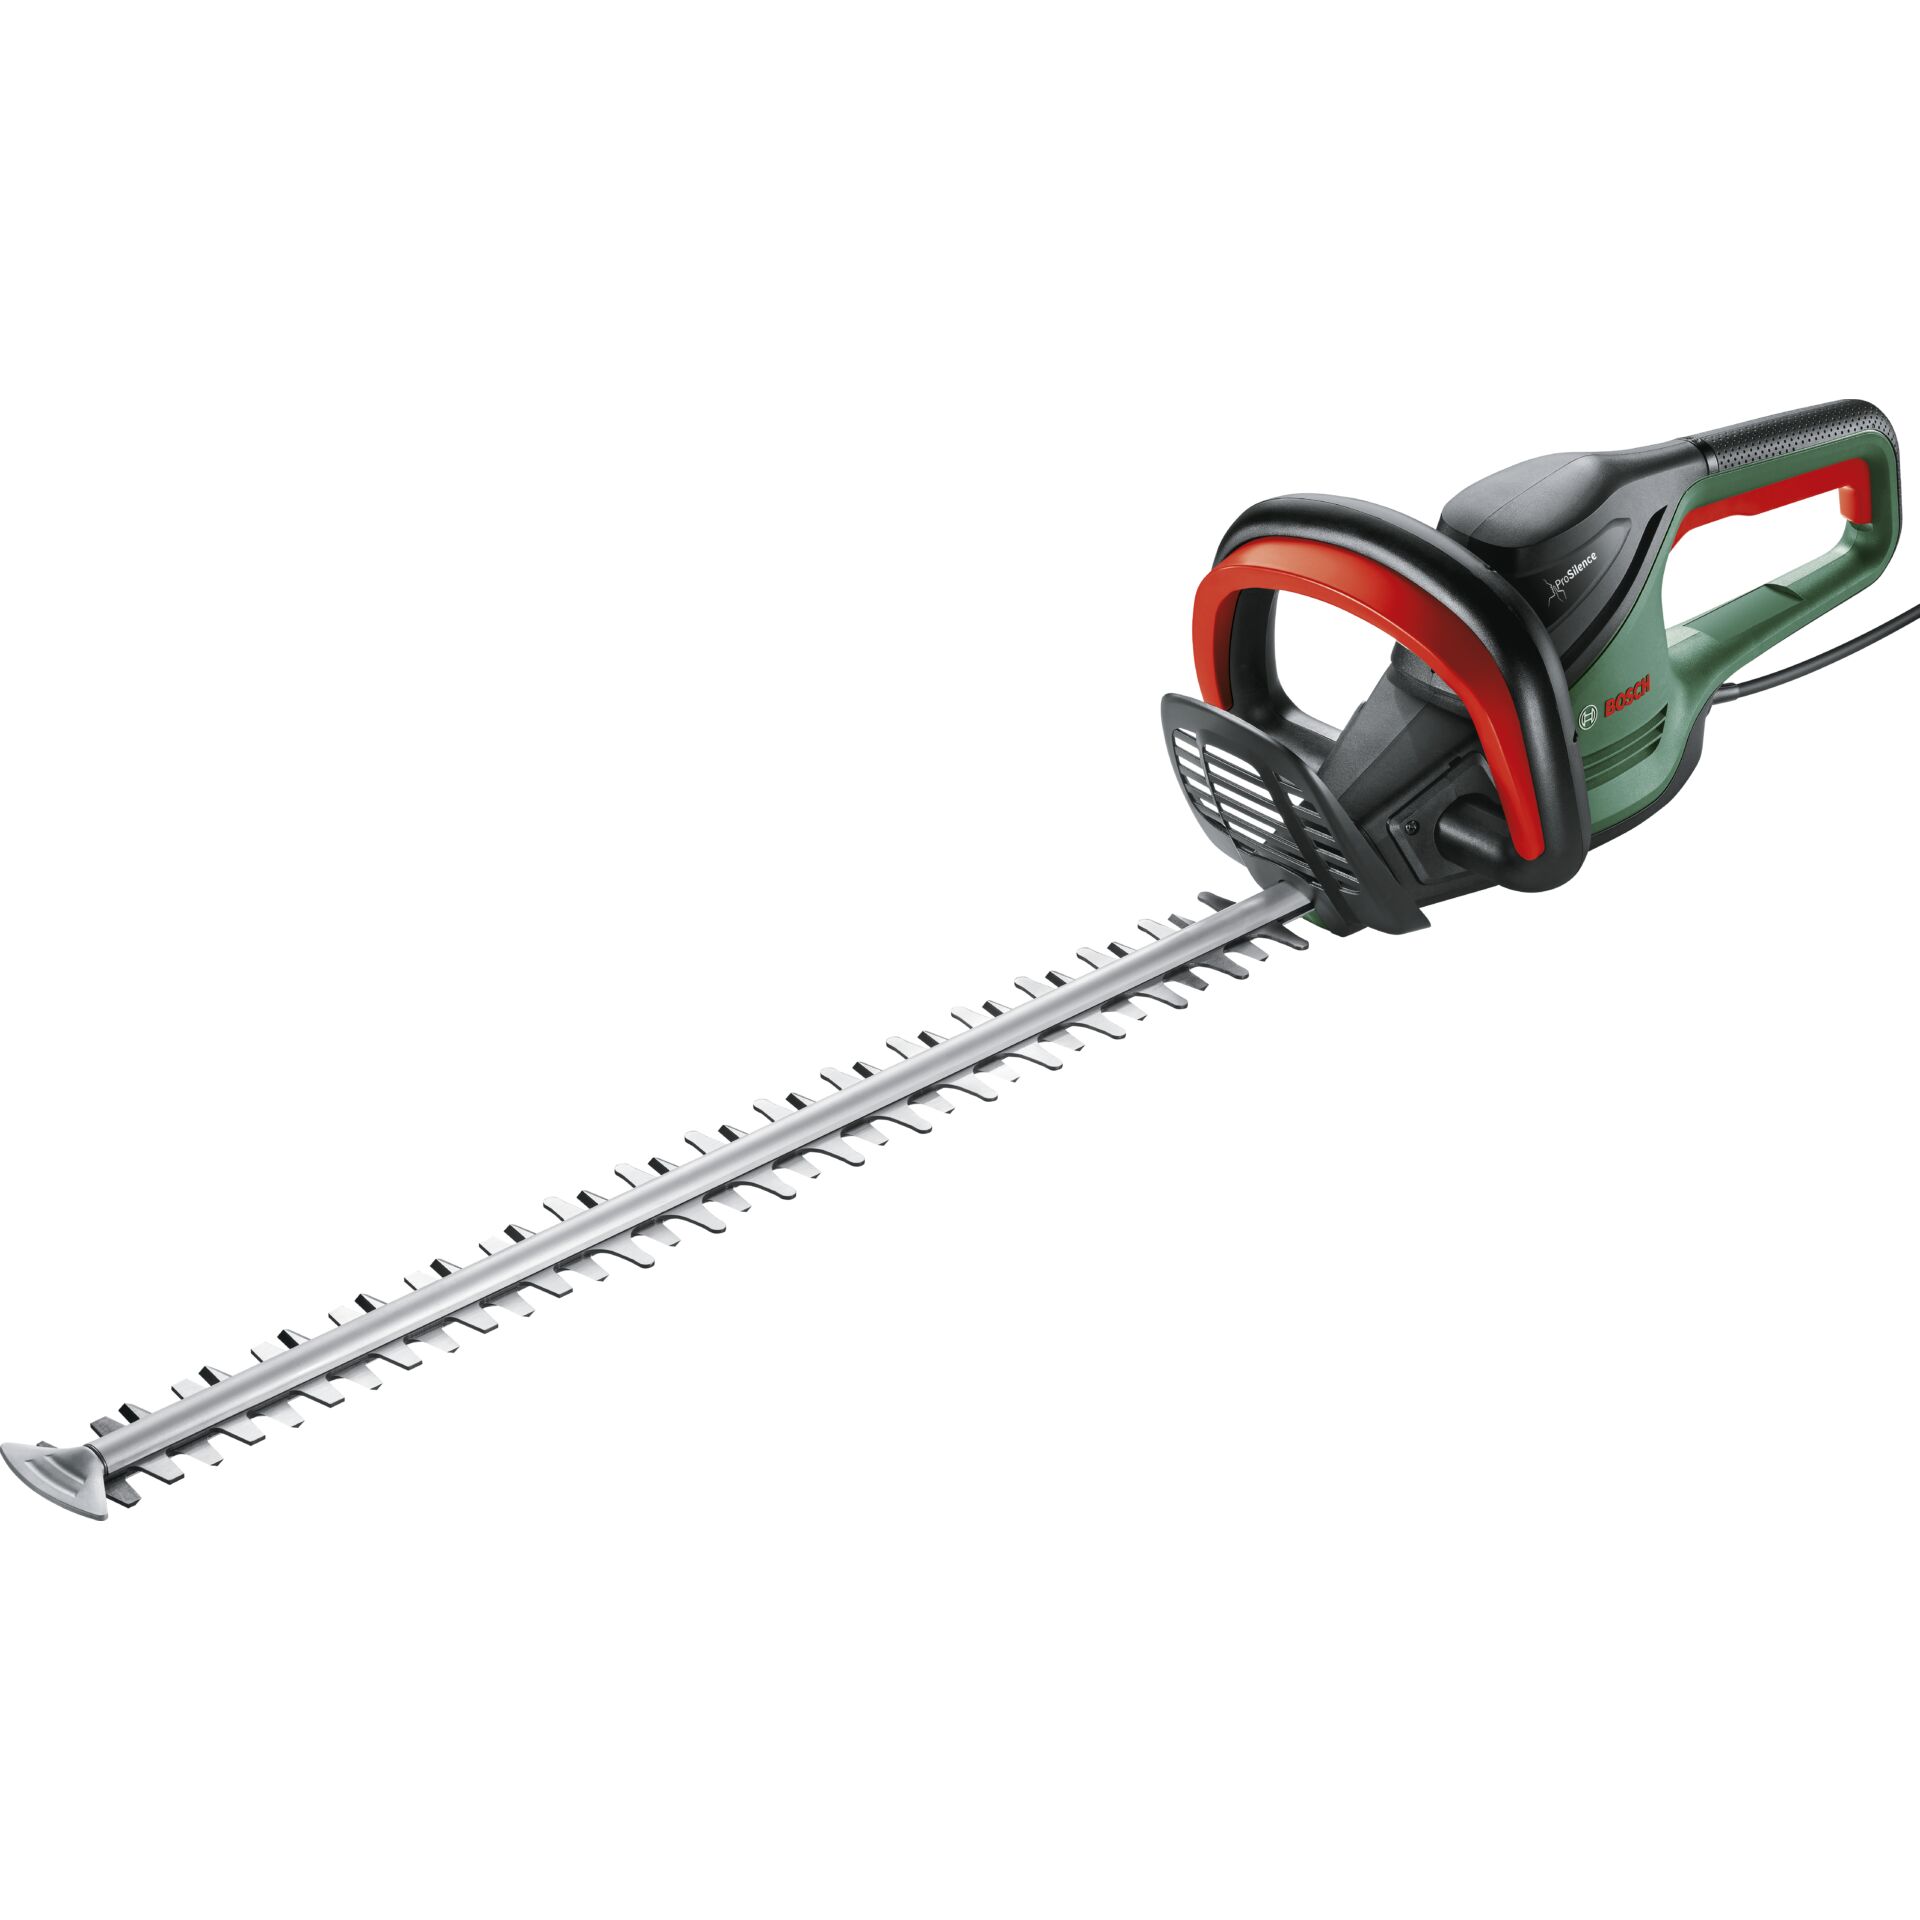 Bosch AdvancedHedgeCut 70 electronic hedge clippers